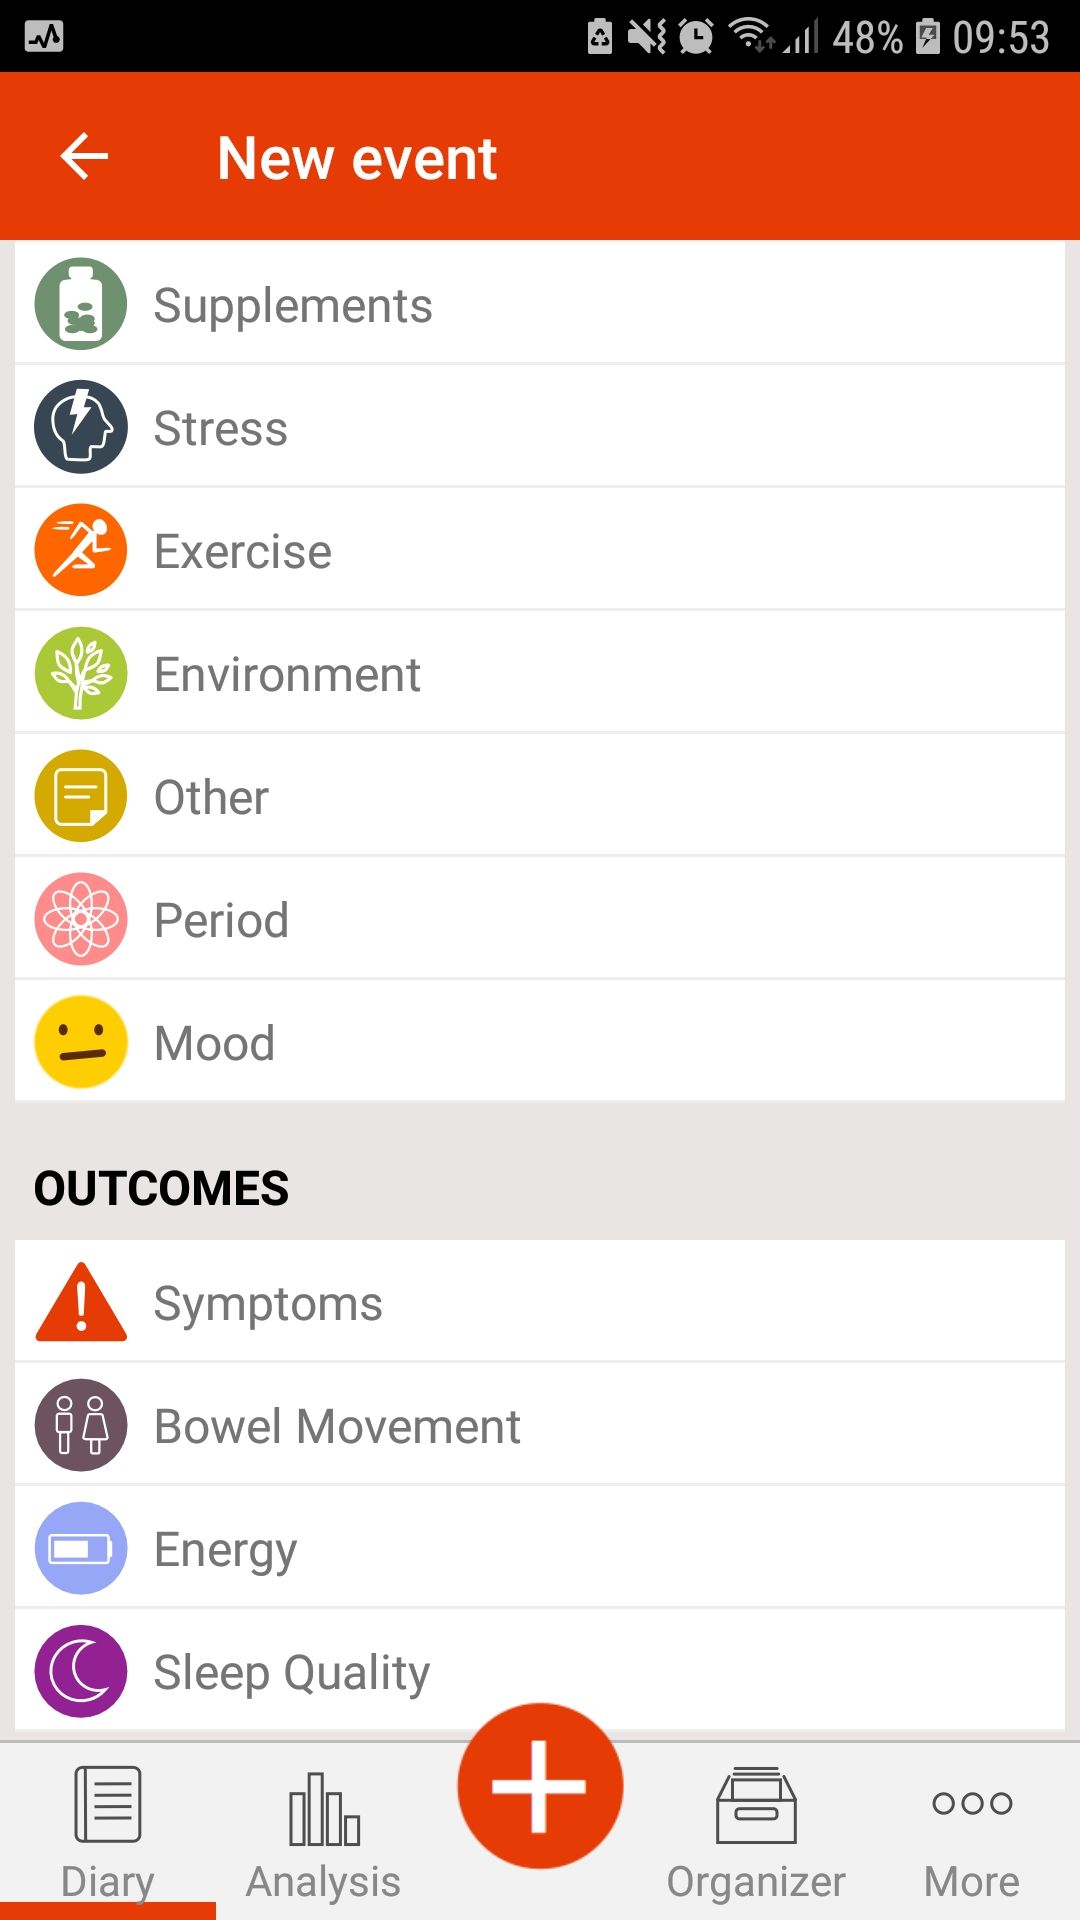 mySymptoms food diary mobile app events outcomes